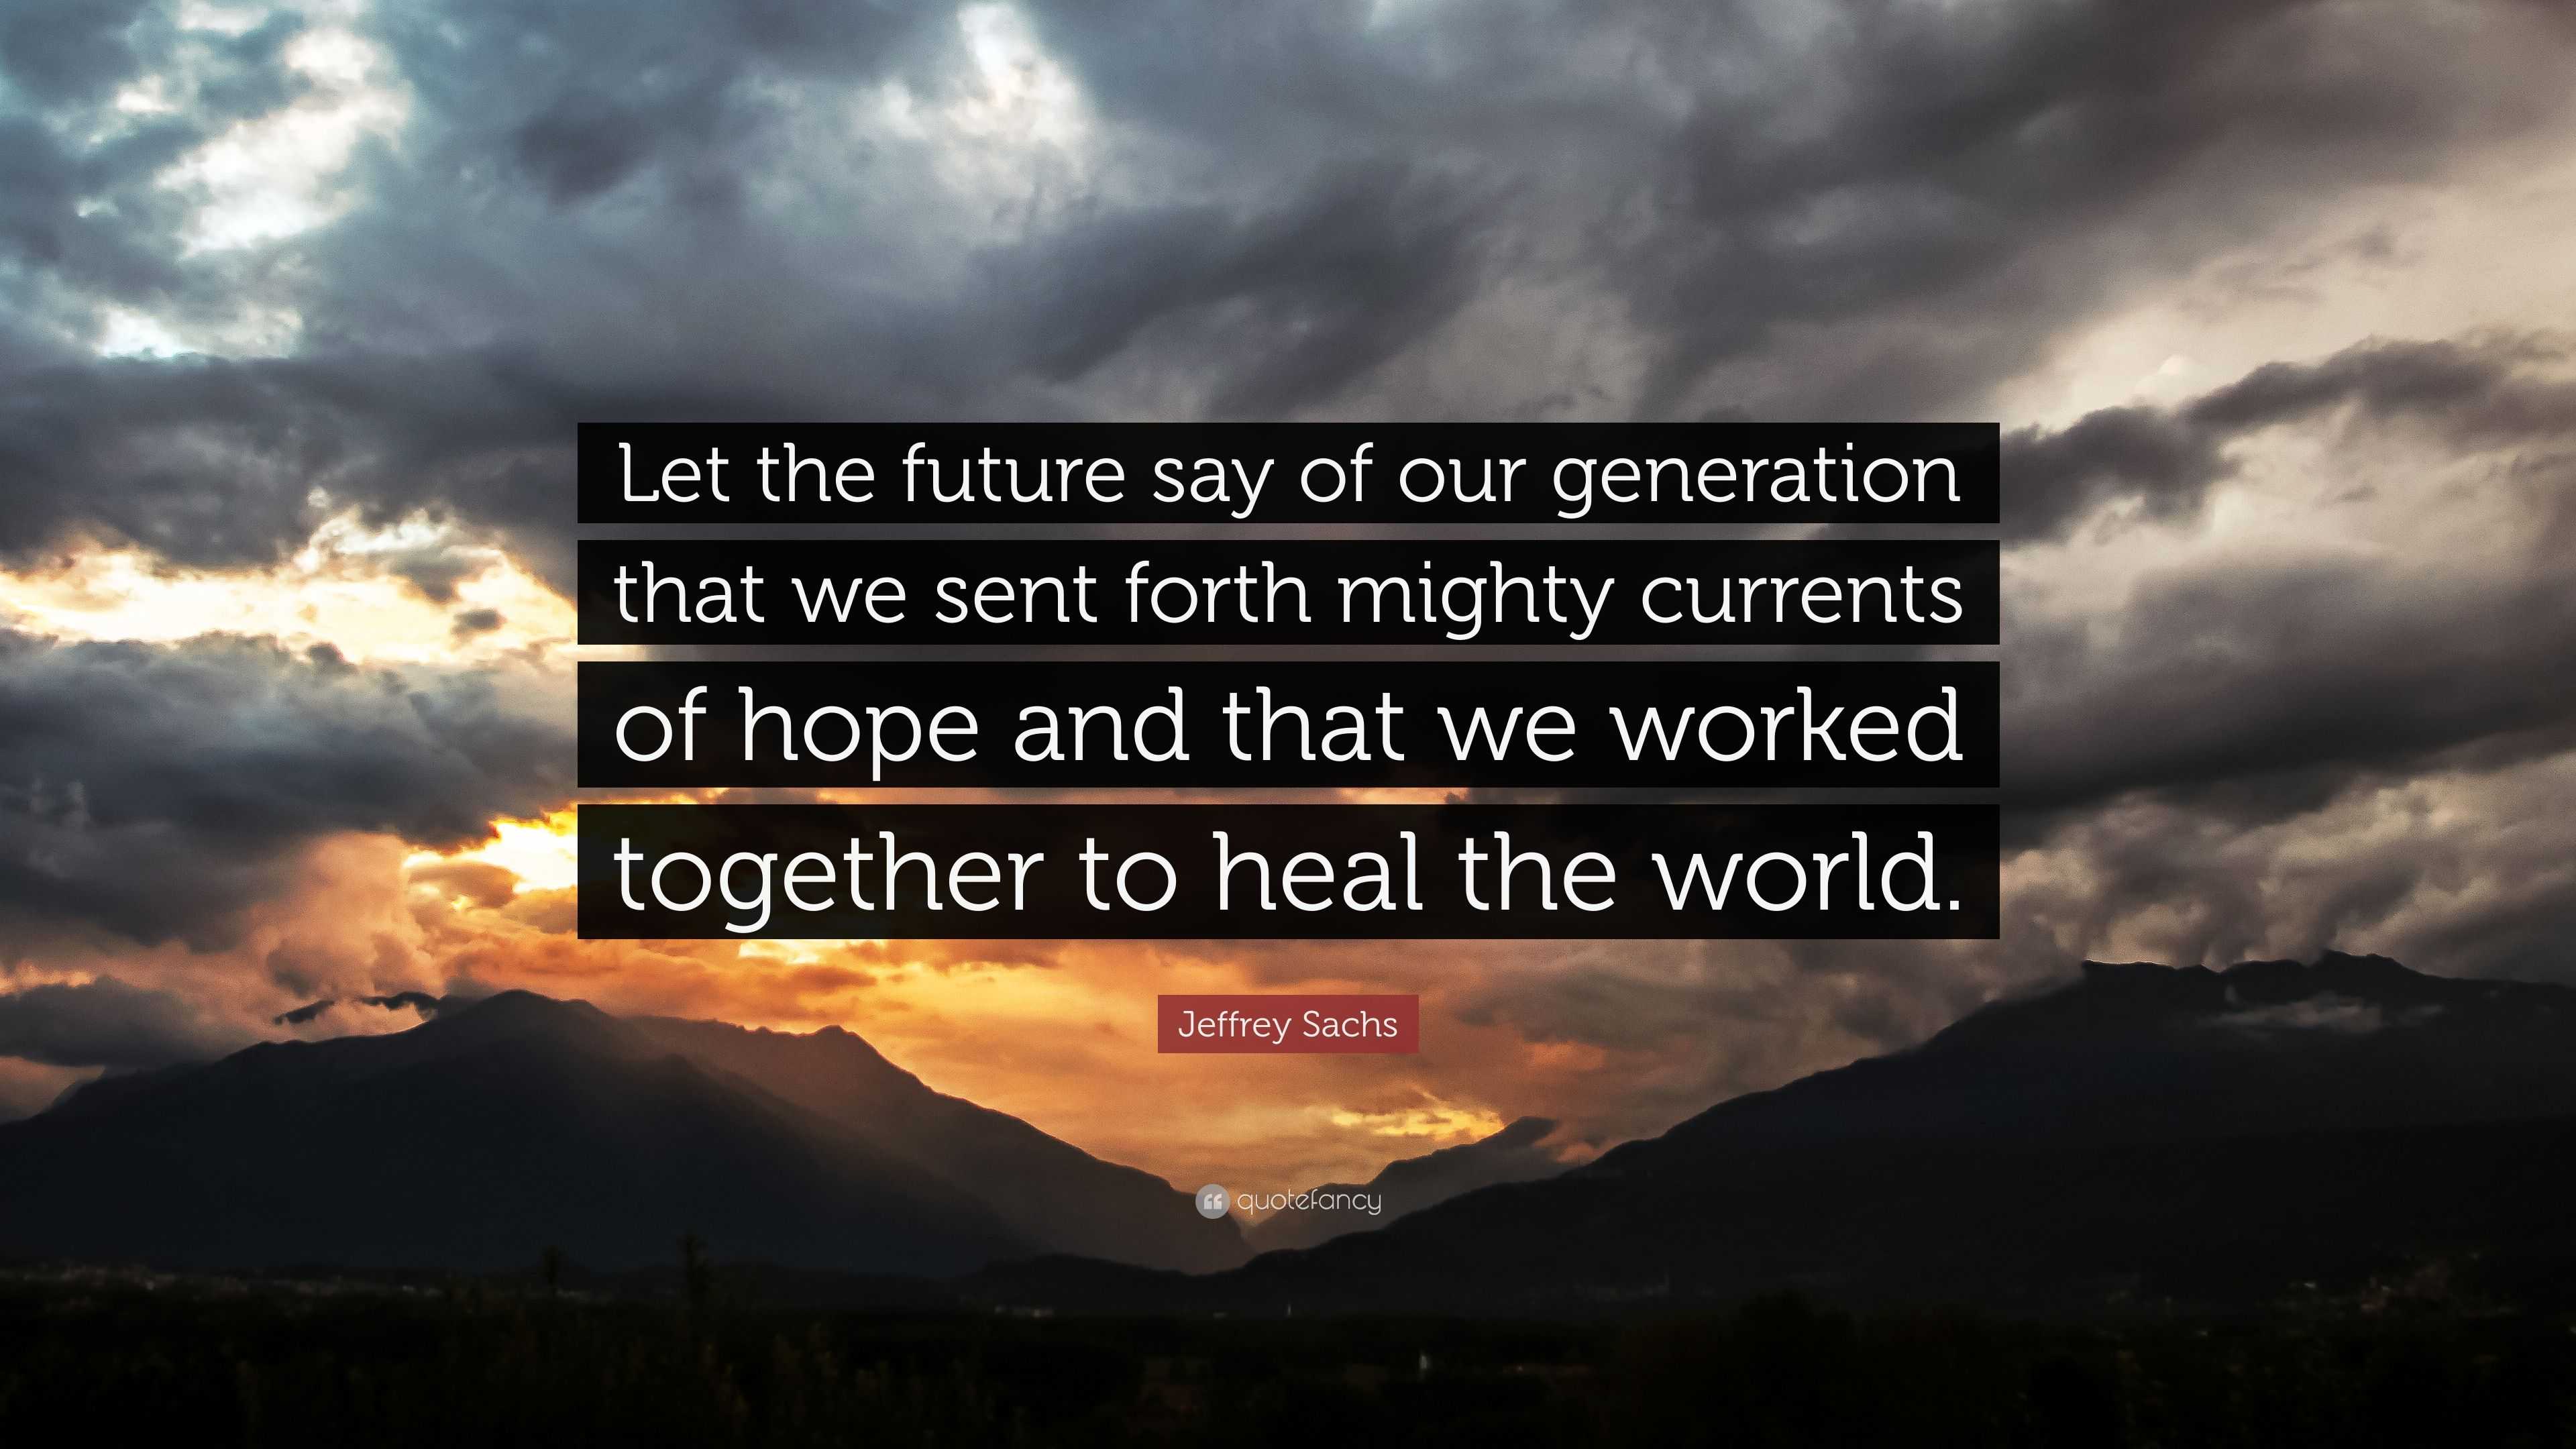 Jeffrey Sachs Quote: “Let the future say of our generation that we sent ...